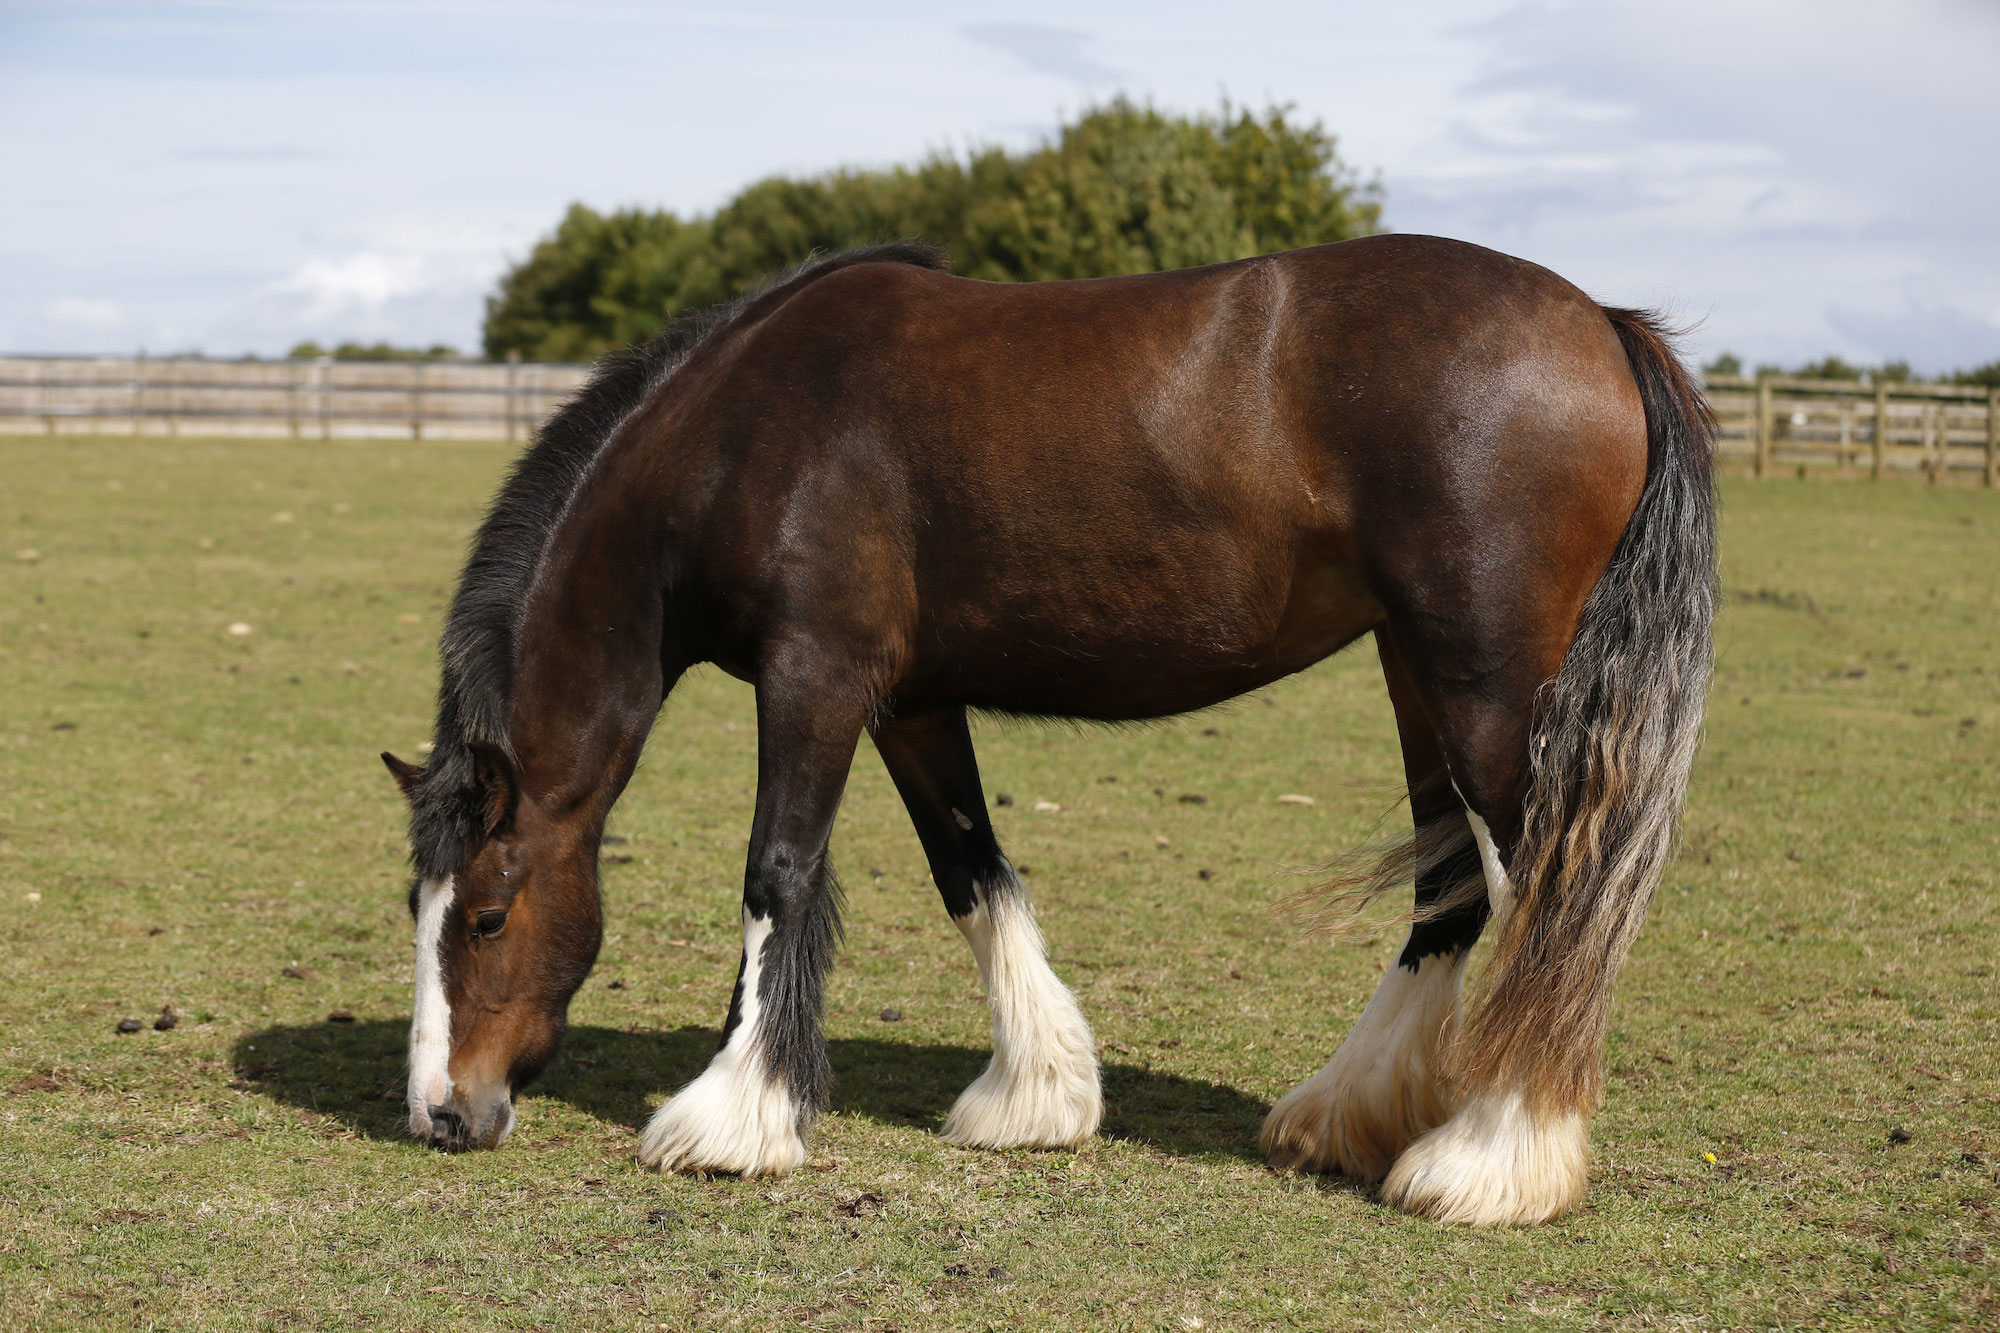 Equestrian Rubber Surfaces for Your Horses' Comfort and Wellbeing